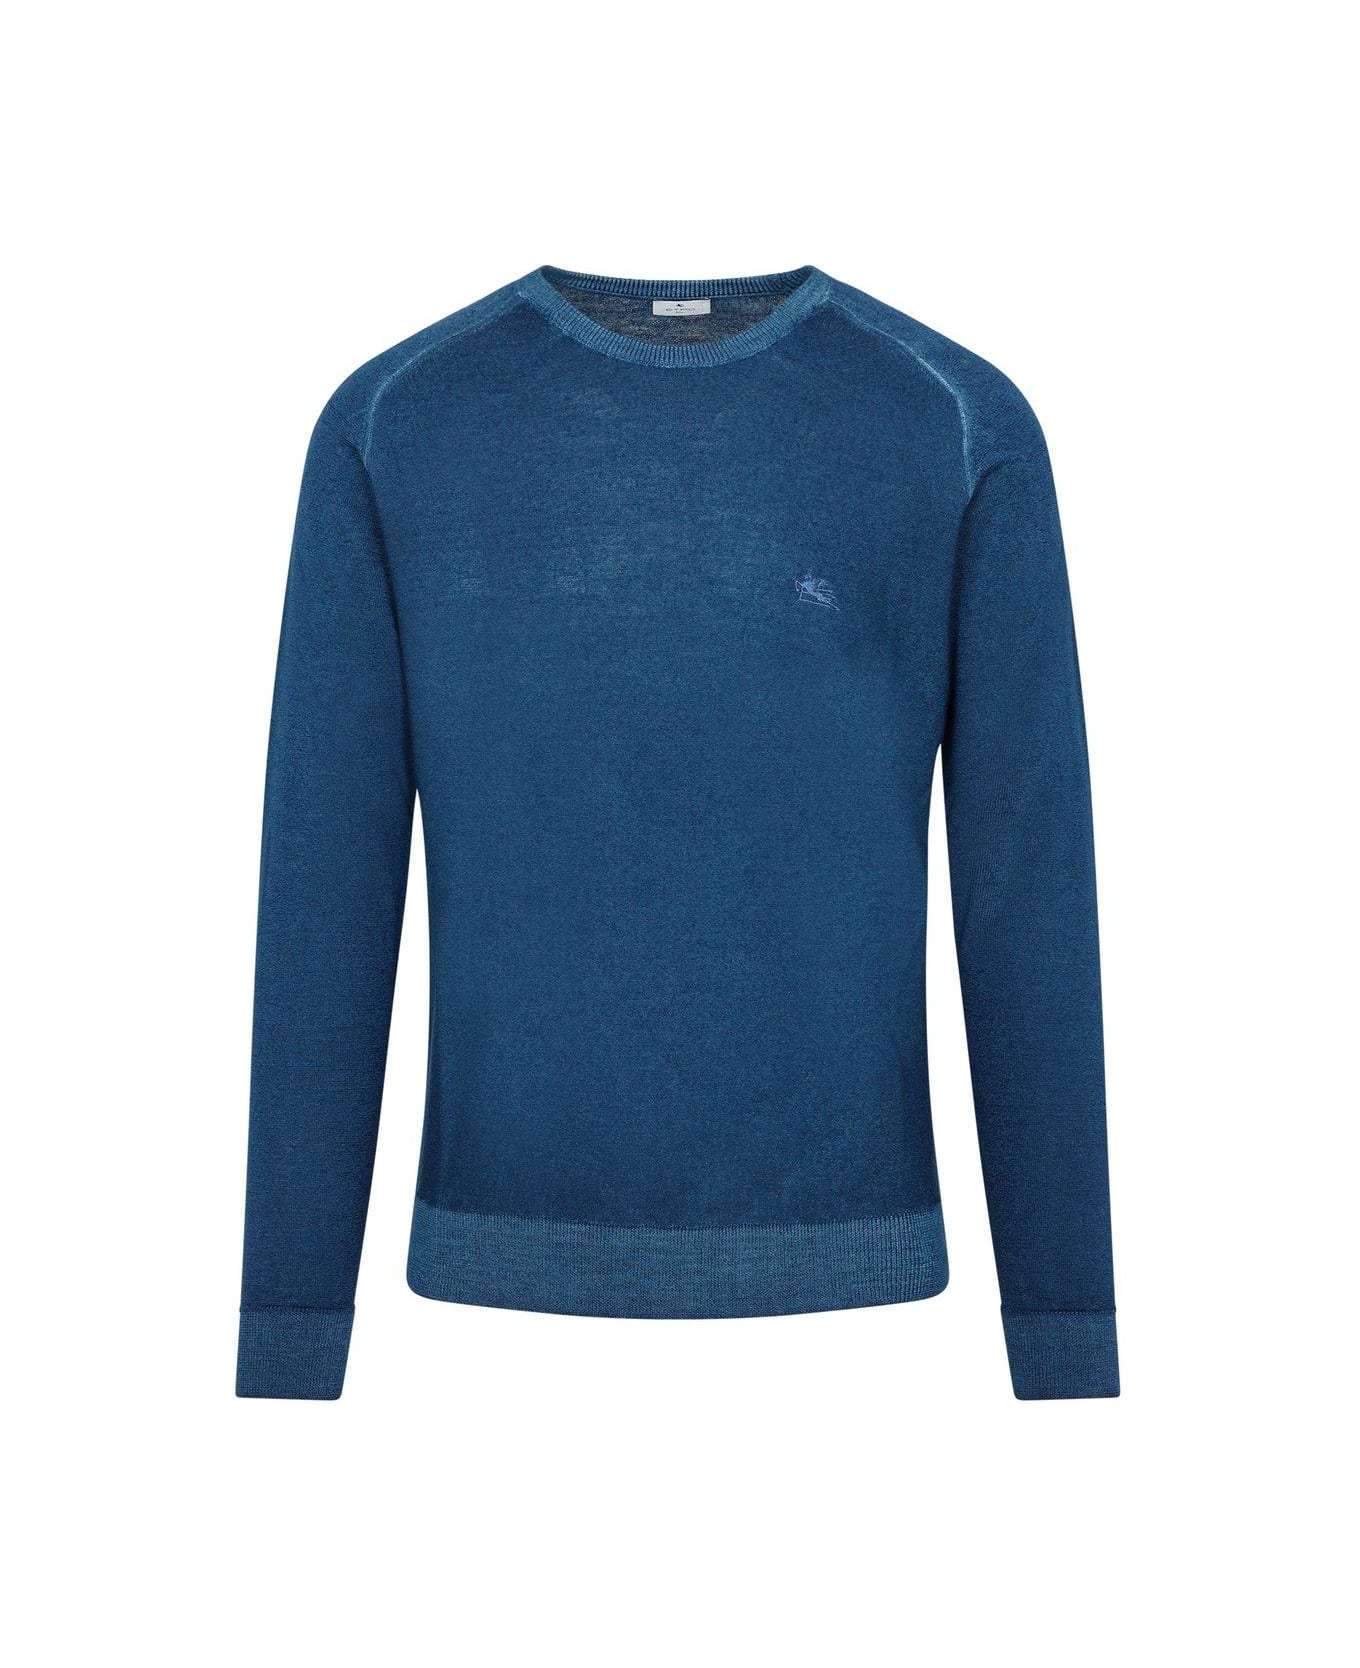 Etro Crewneck Knitted Sweater